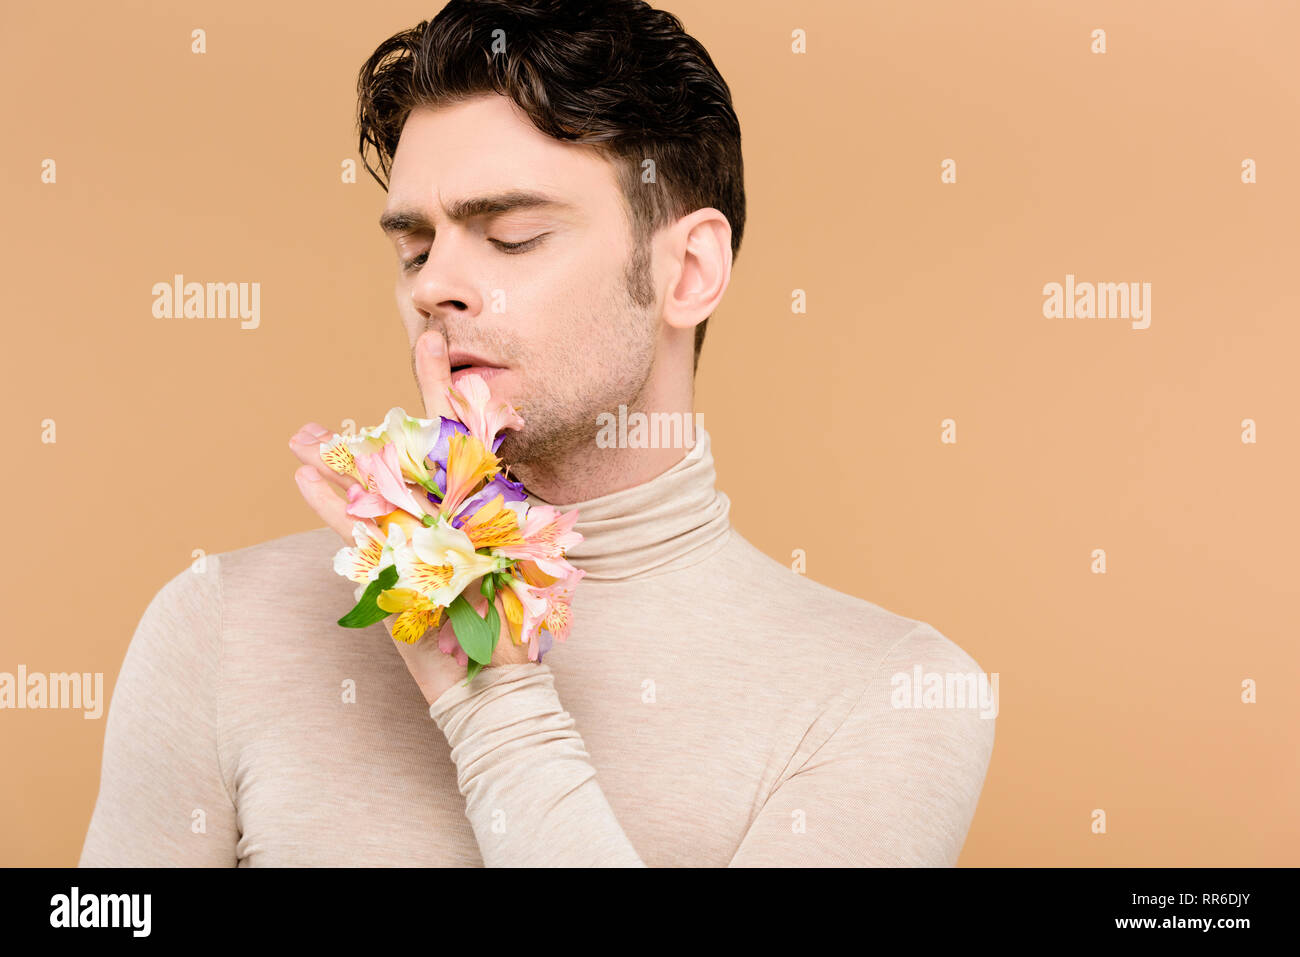 man with alstroemeria flowers on hand showing hush sign isolated on beige Stock Photo